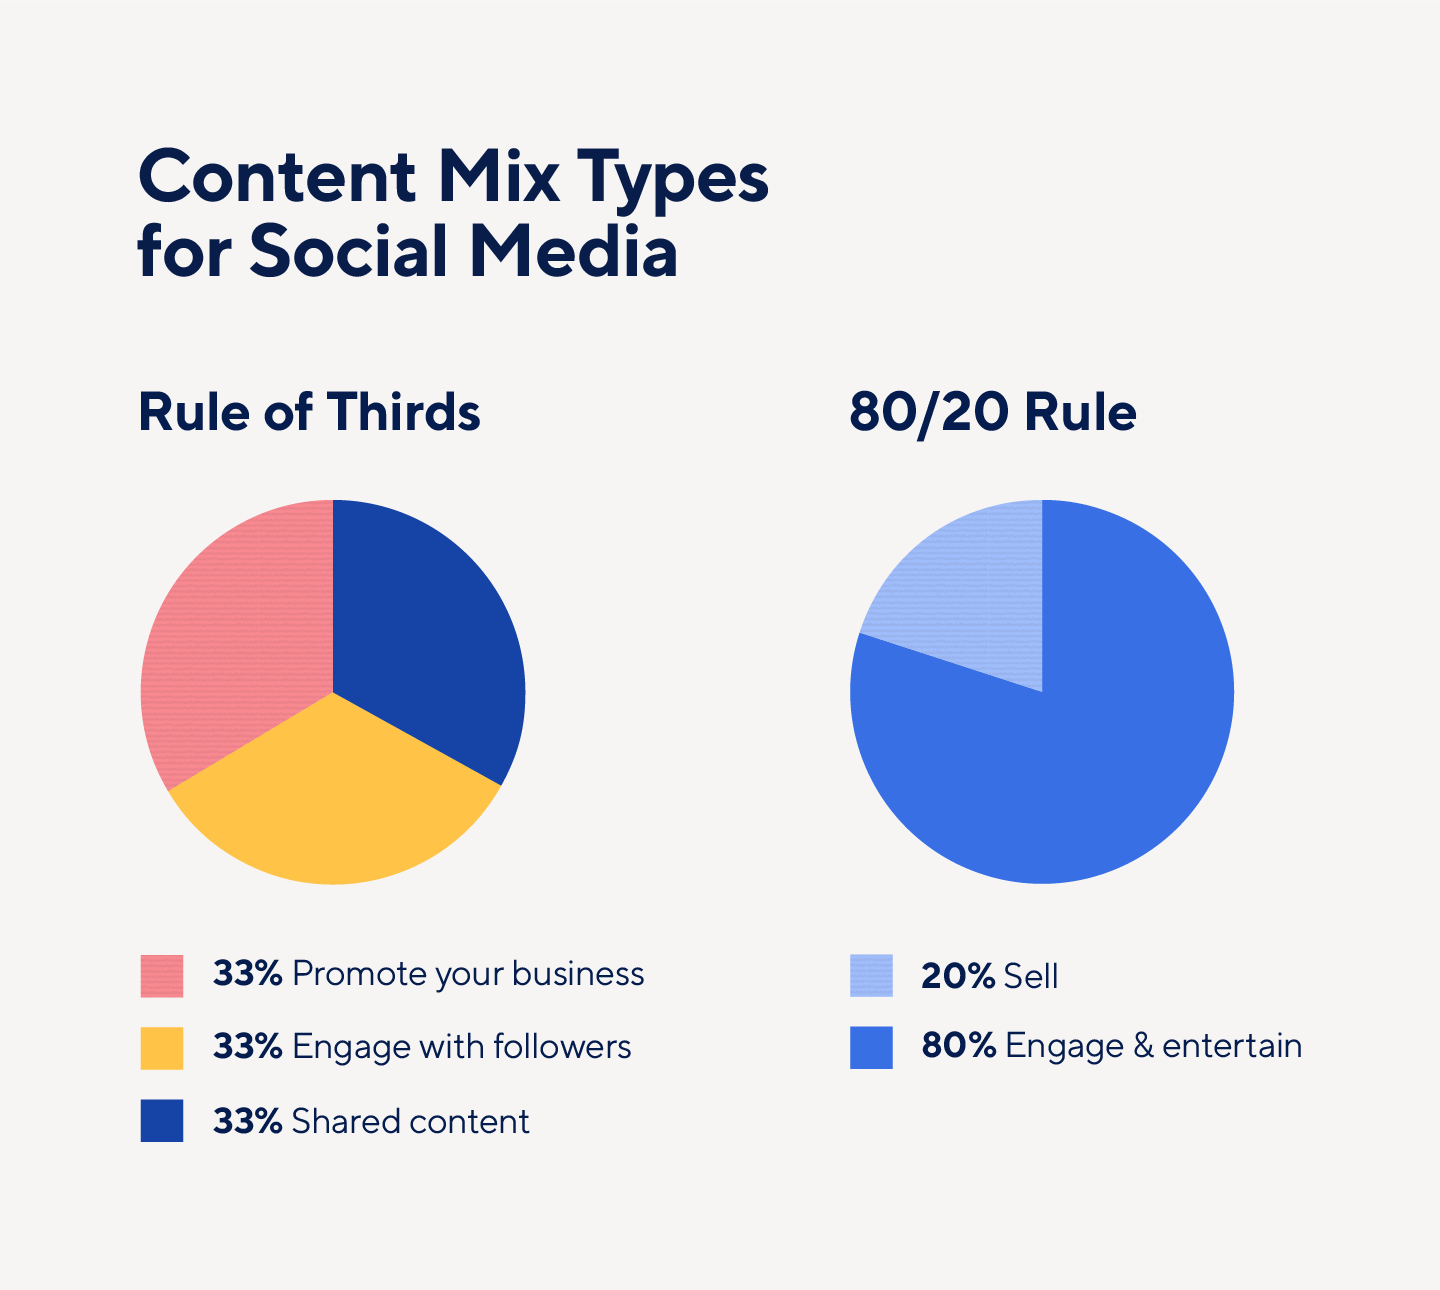 Consider using the rule of thirds or the 80/20 rule to achieve a mix of content.